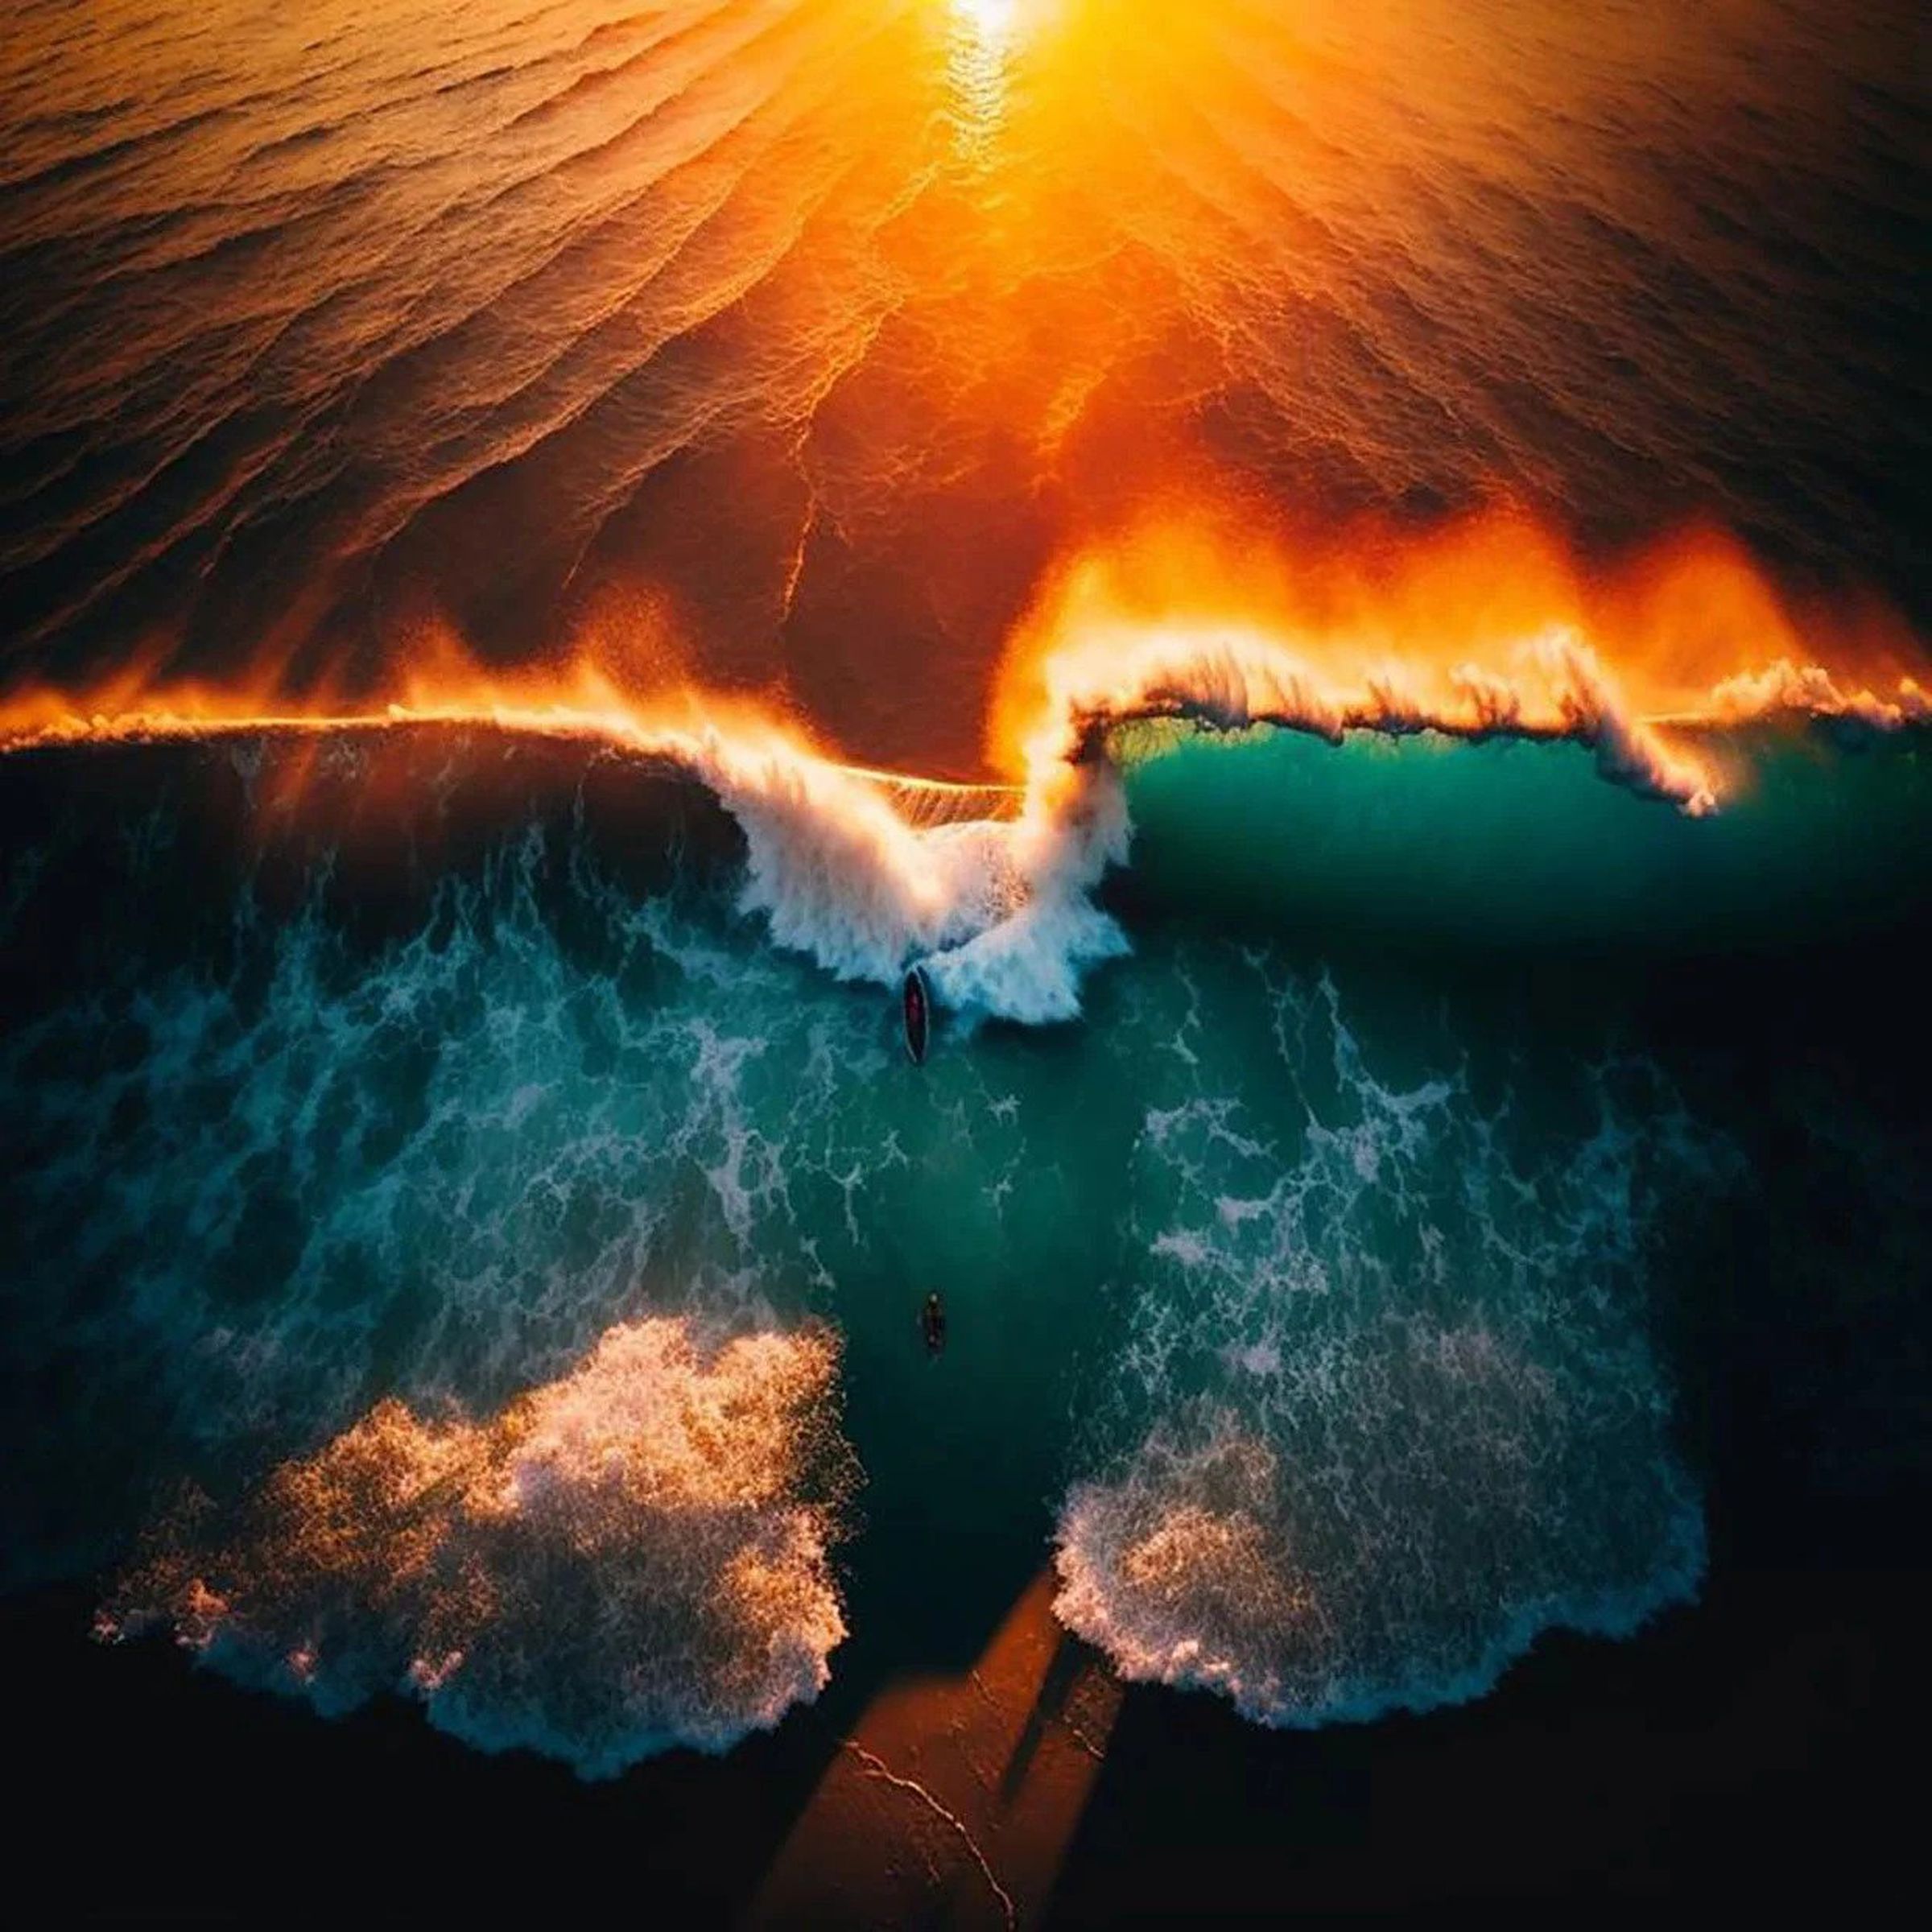 A photograph generated with artificial intelligence. The image shows a top-down view of an ocean wave being hit by orange sunlight.